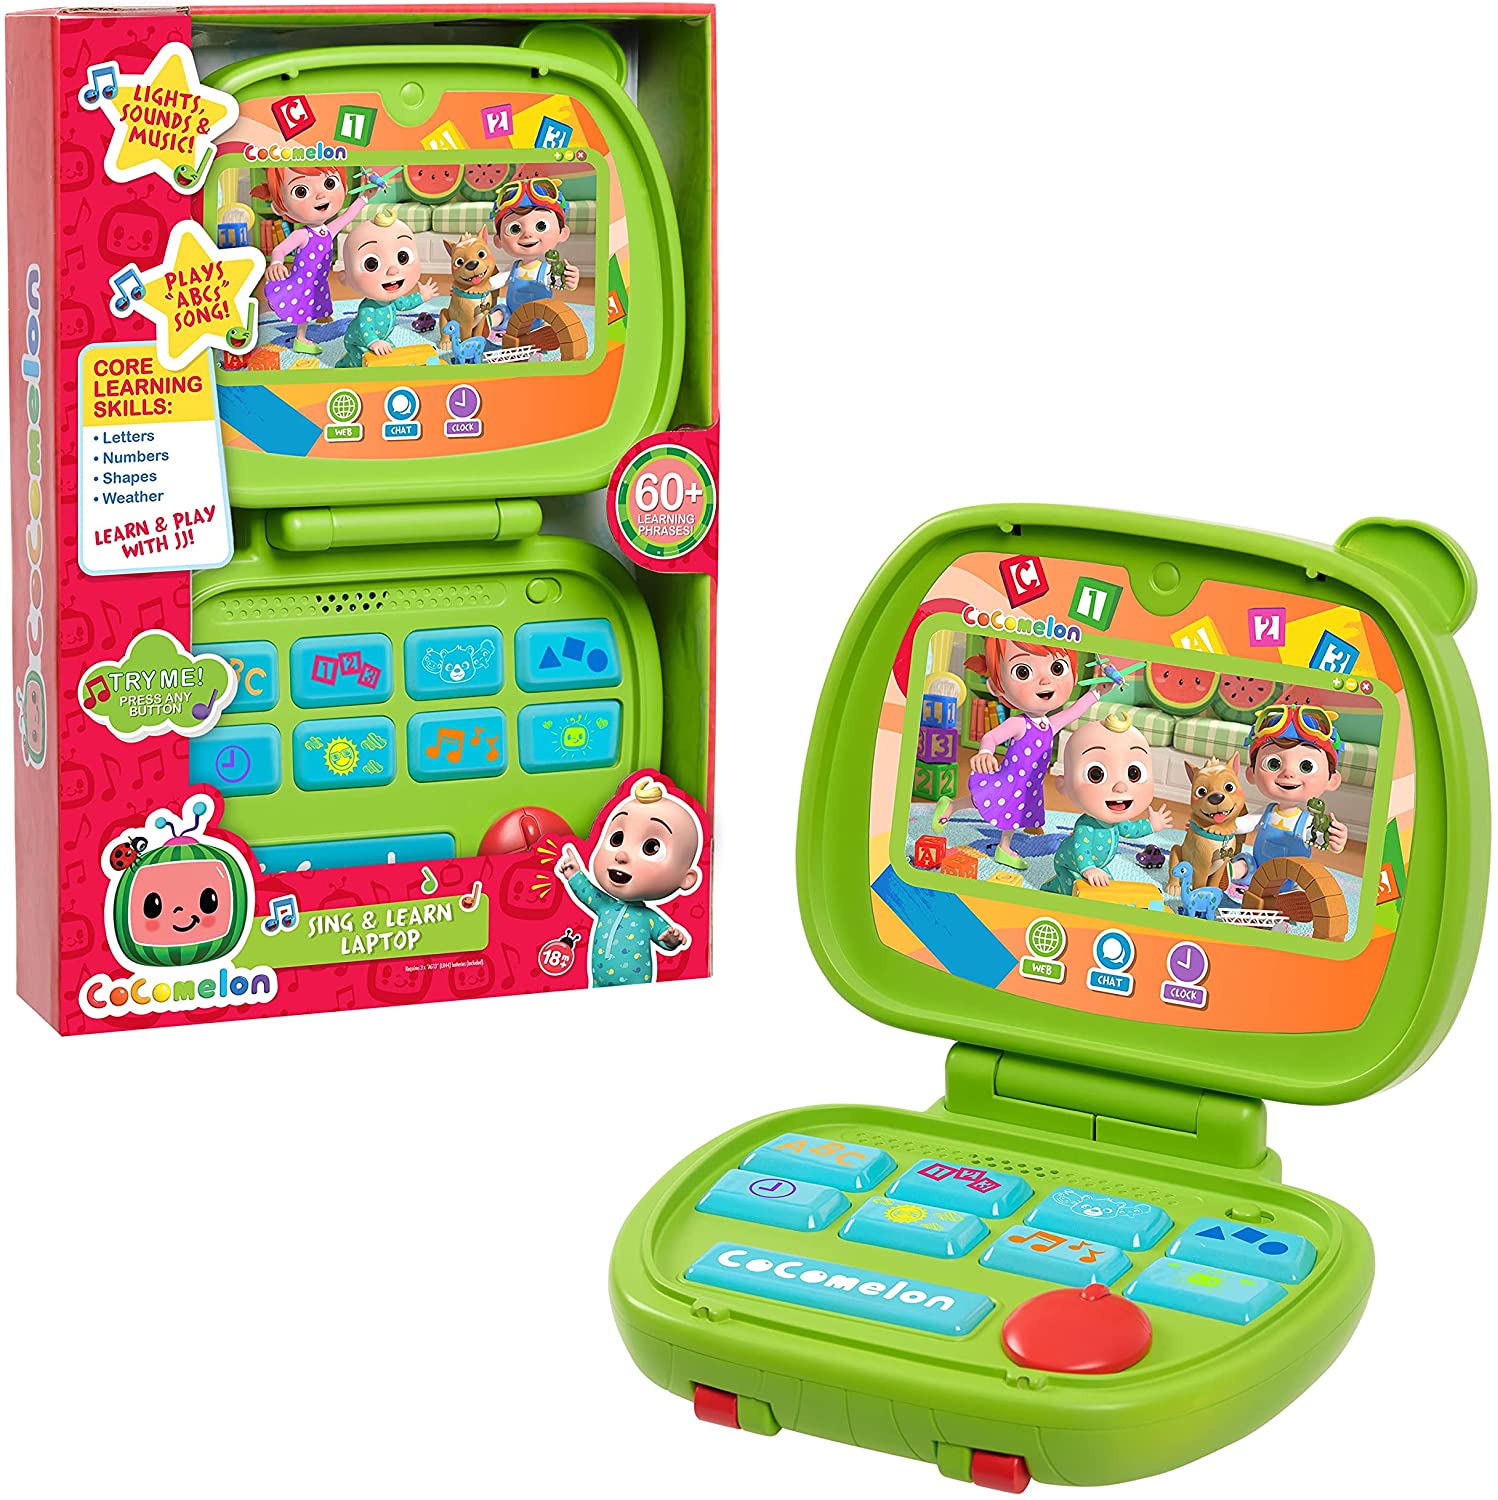 CoComelon Sing and Learn Laptop Toy (Lights/Sounds) $15.99 - Amazon, Walmart